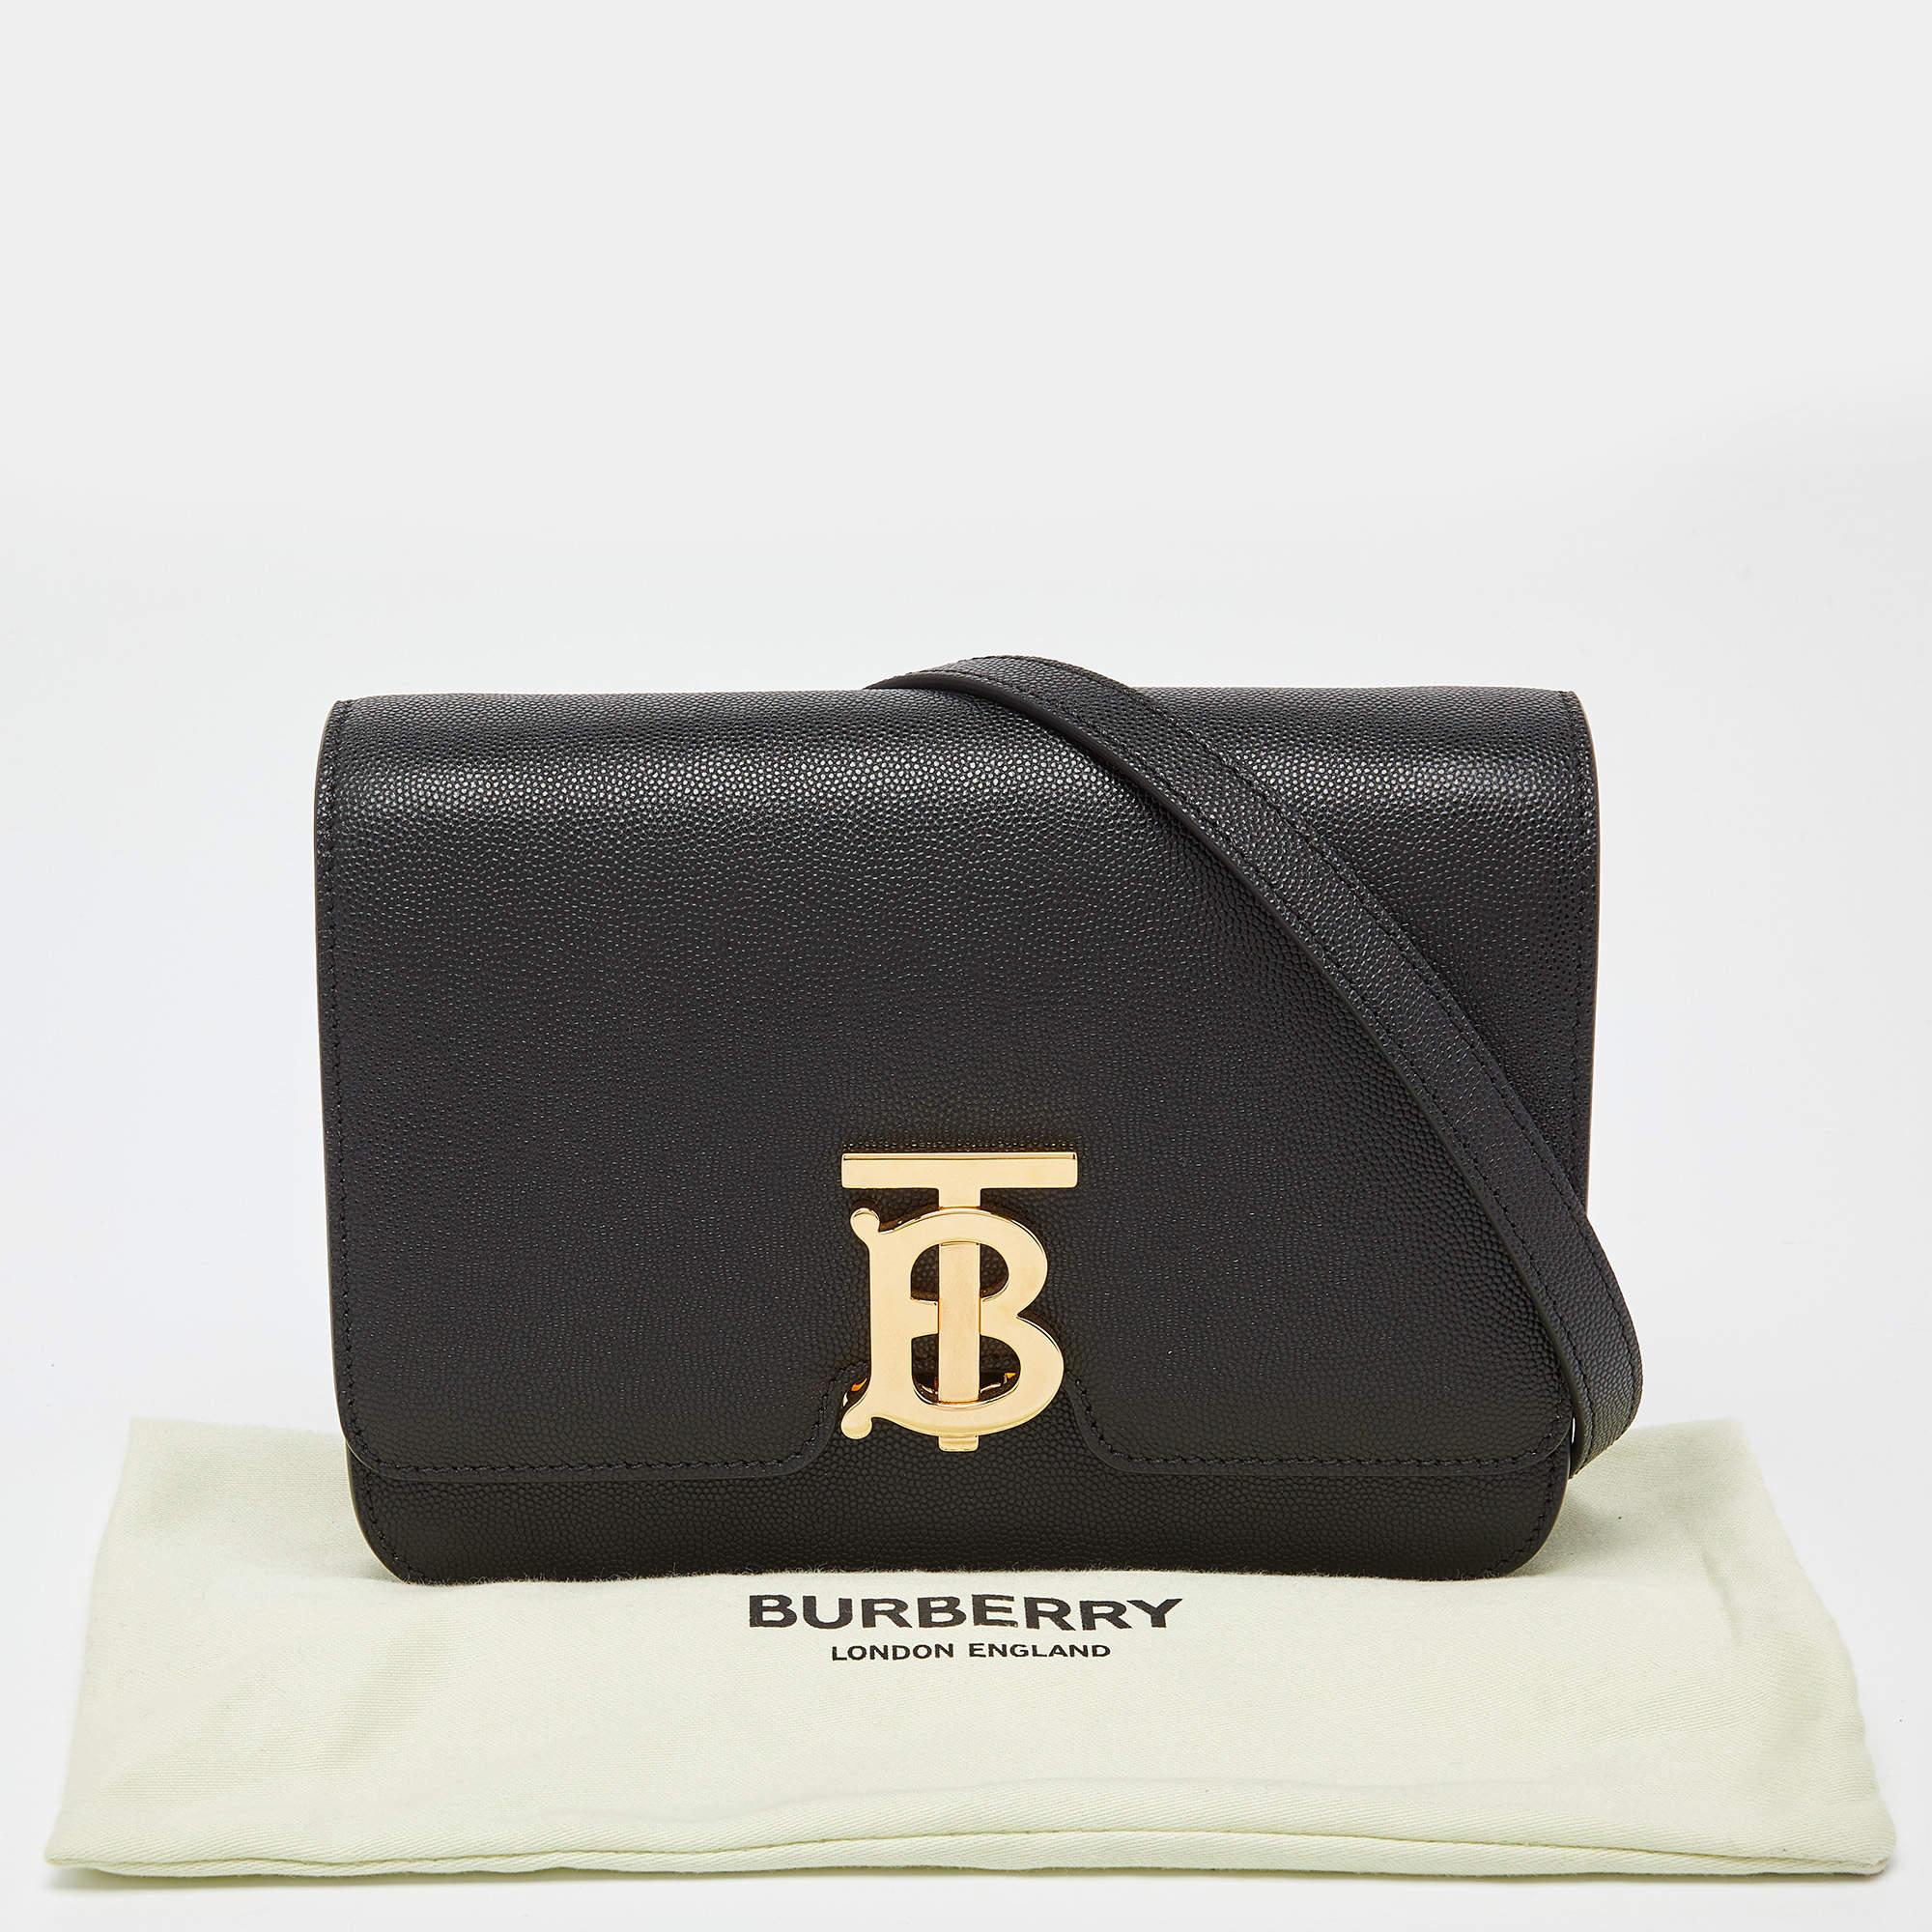 Burberry Black Leather Small TB Shoulder Bag 4